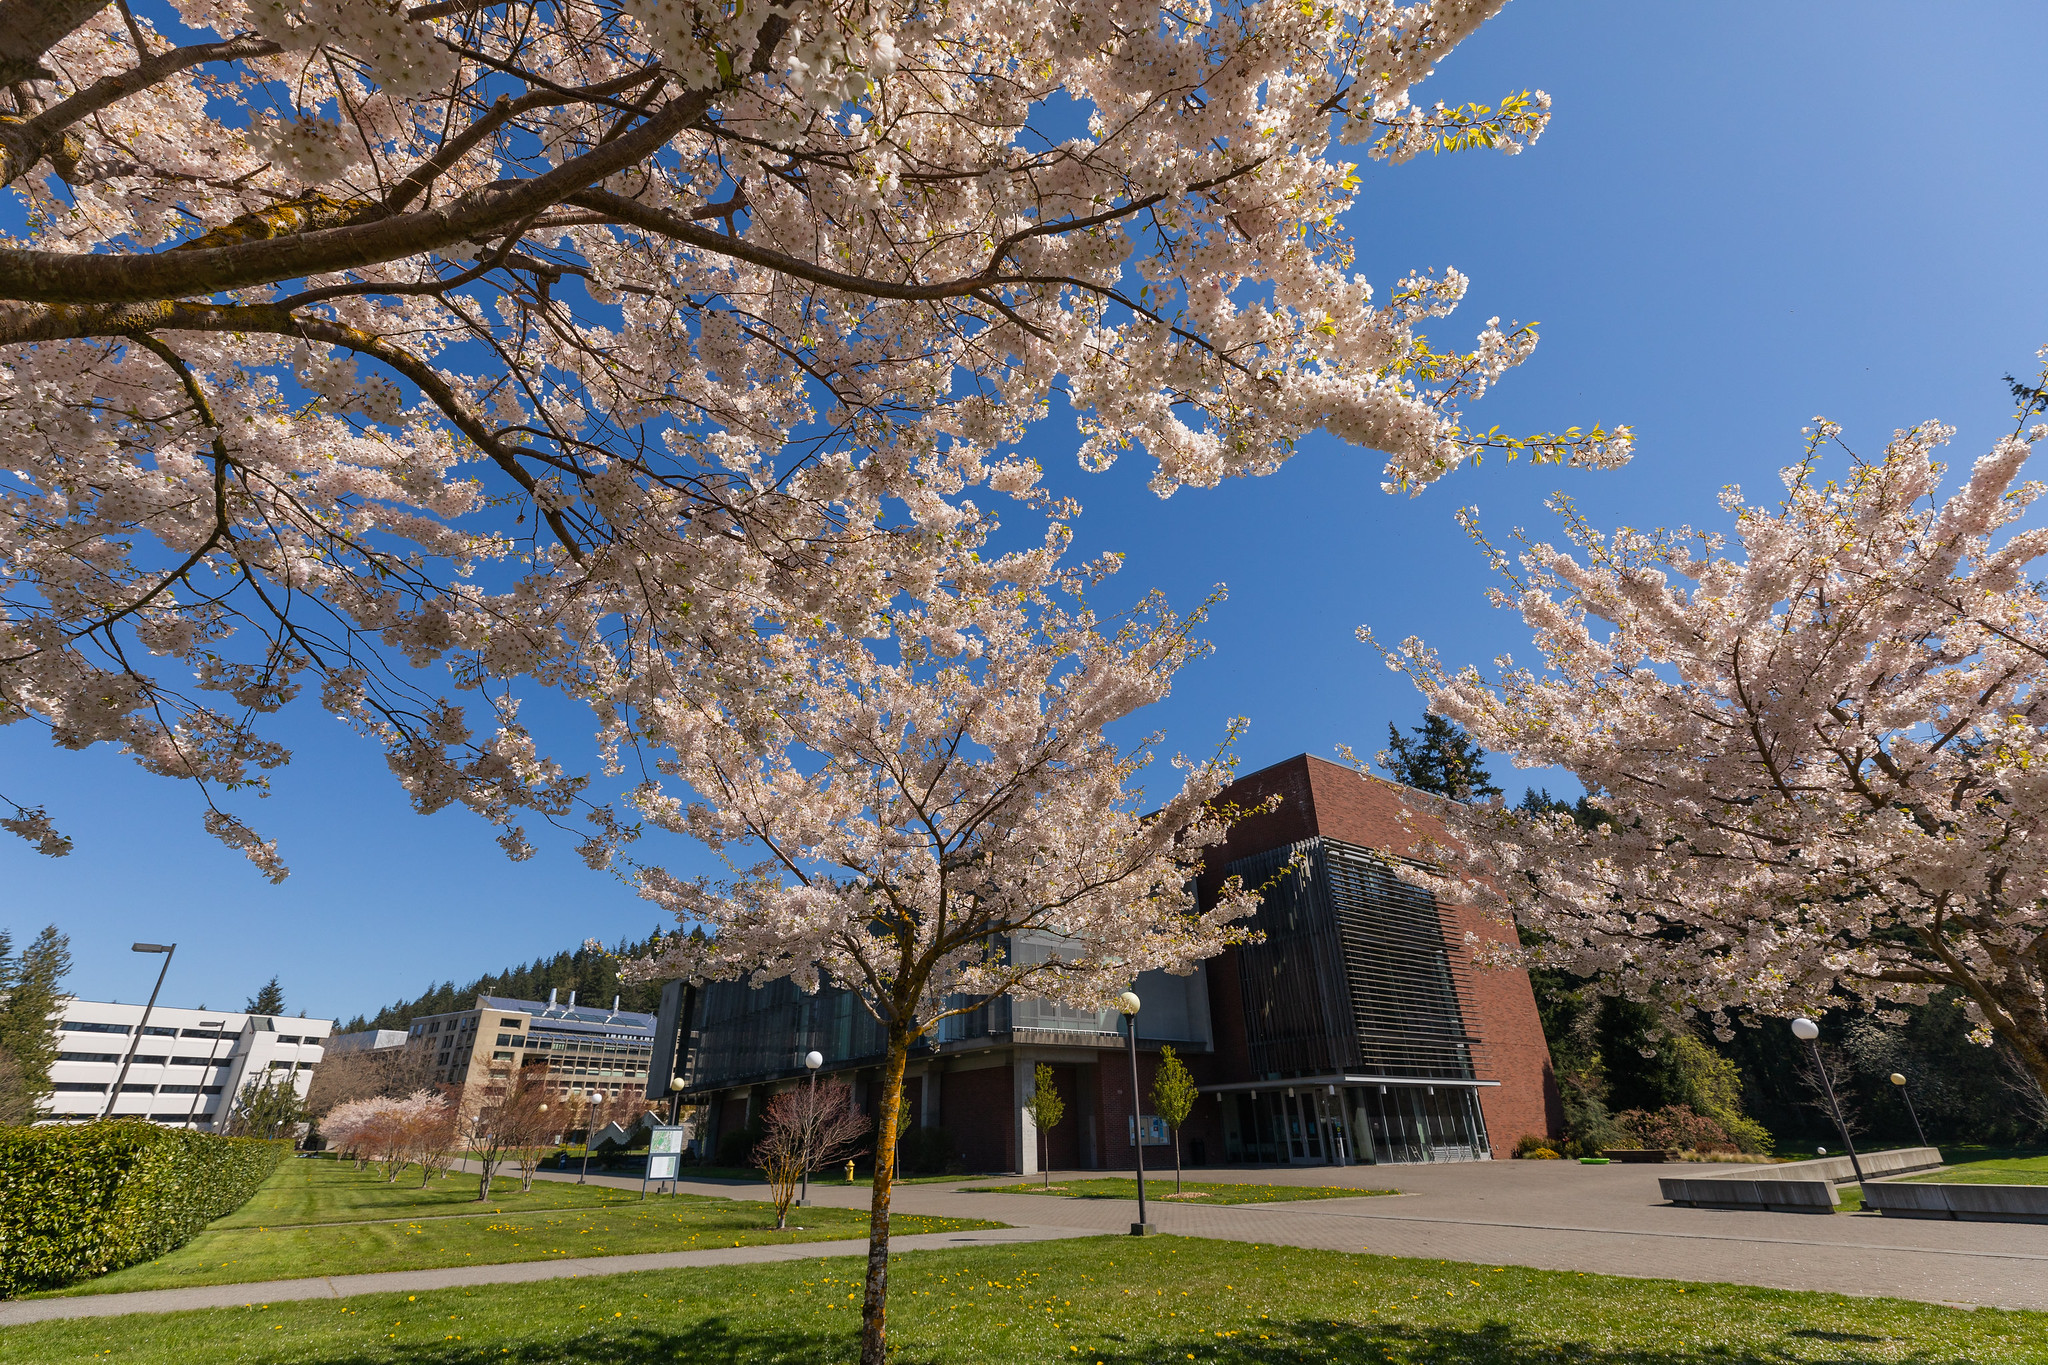 Cherry trees blooming across from the Communications lawn in spring